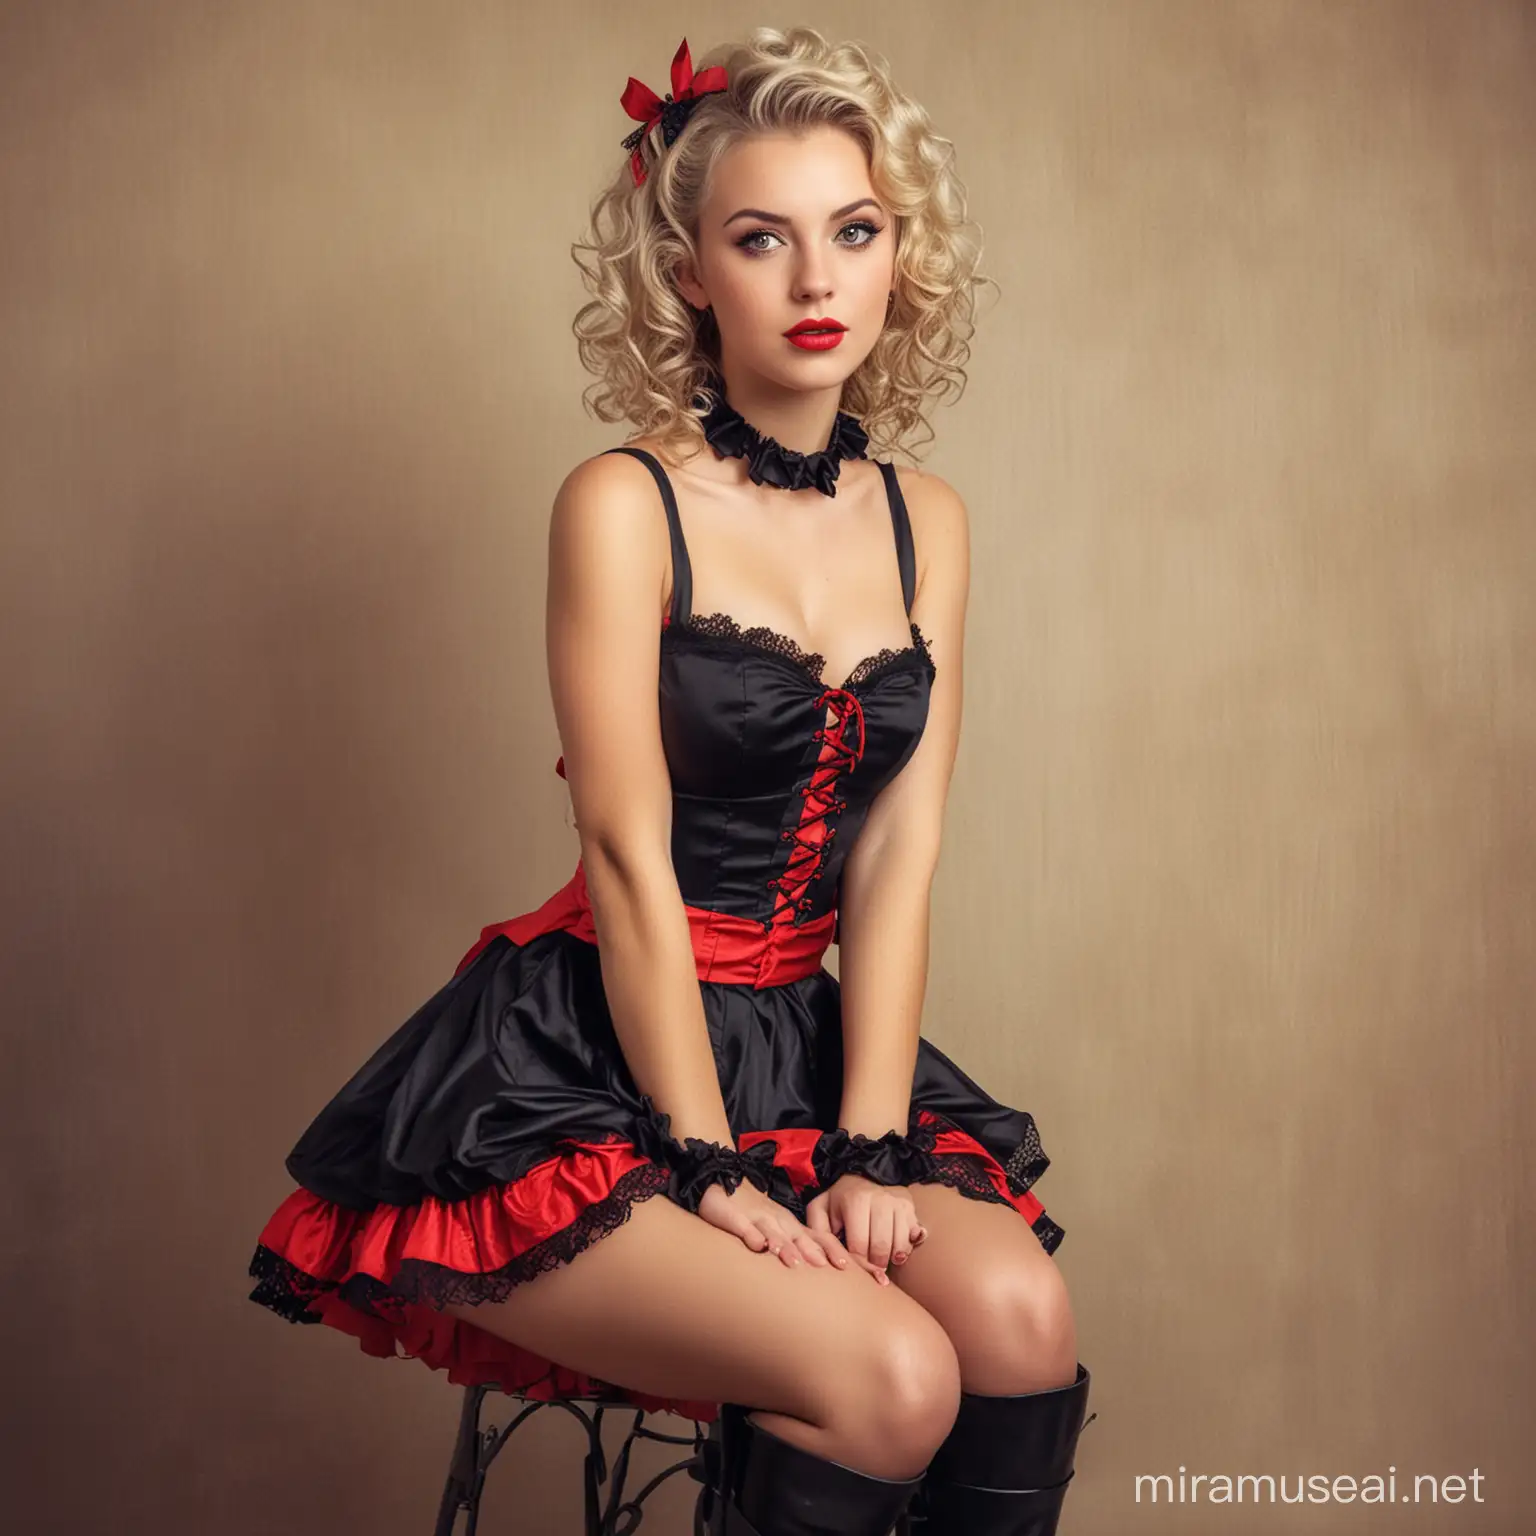 create a beautiful young woman with blonde hair in curls, tied up, olive eyes, wearing a black and red dress, bodice with lace ruffles, short, pin-up style, black boots, listening attentively